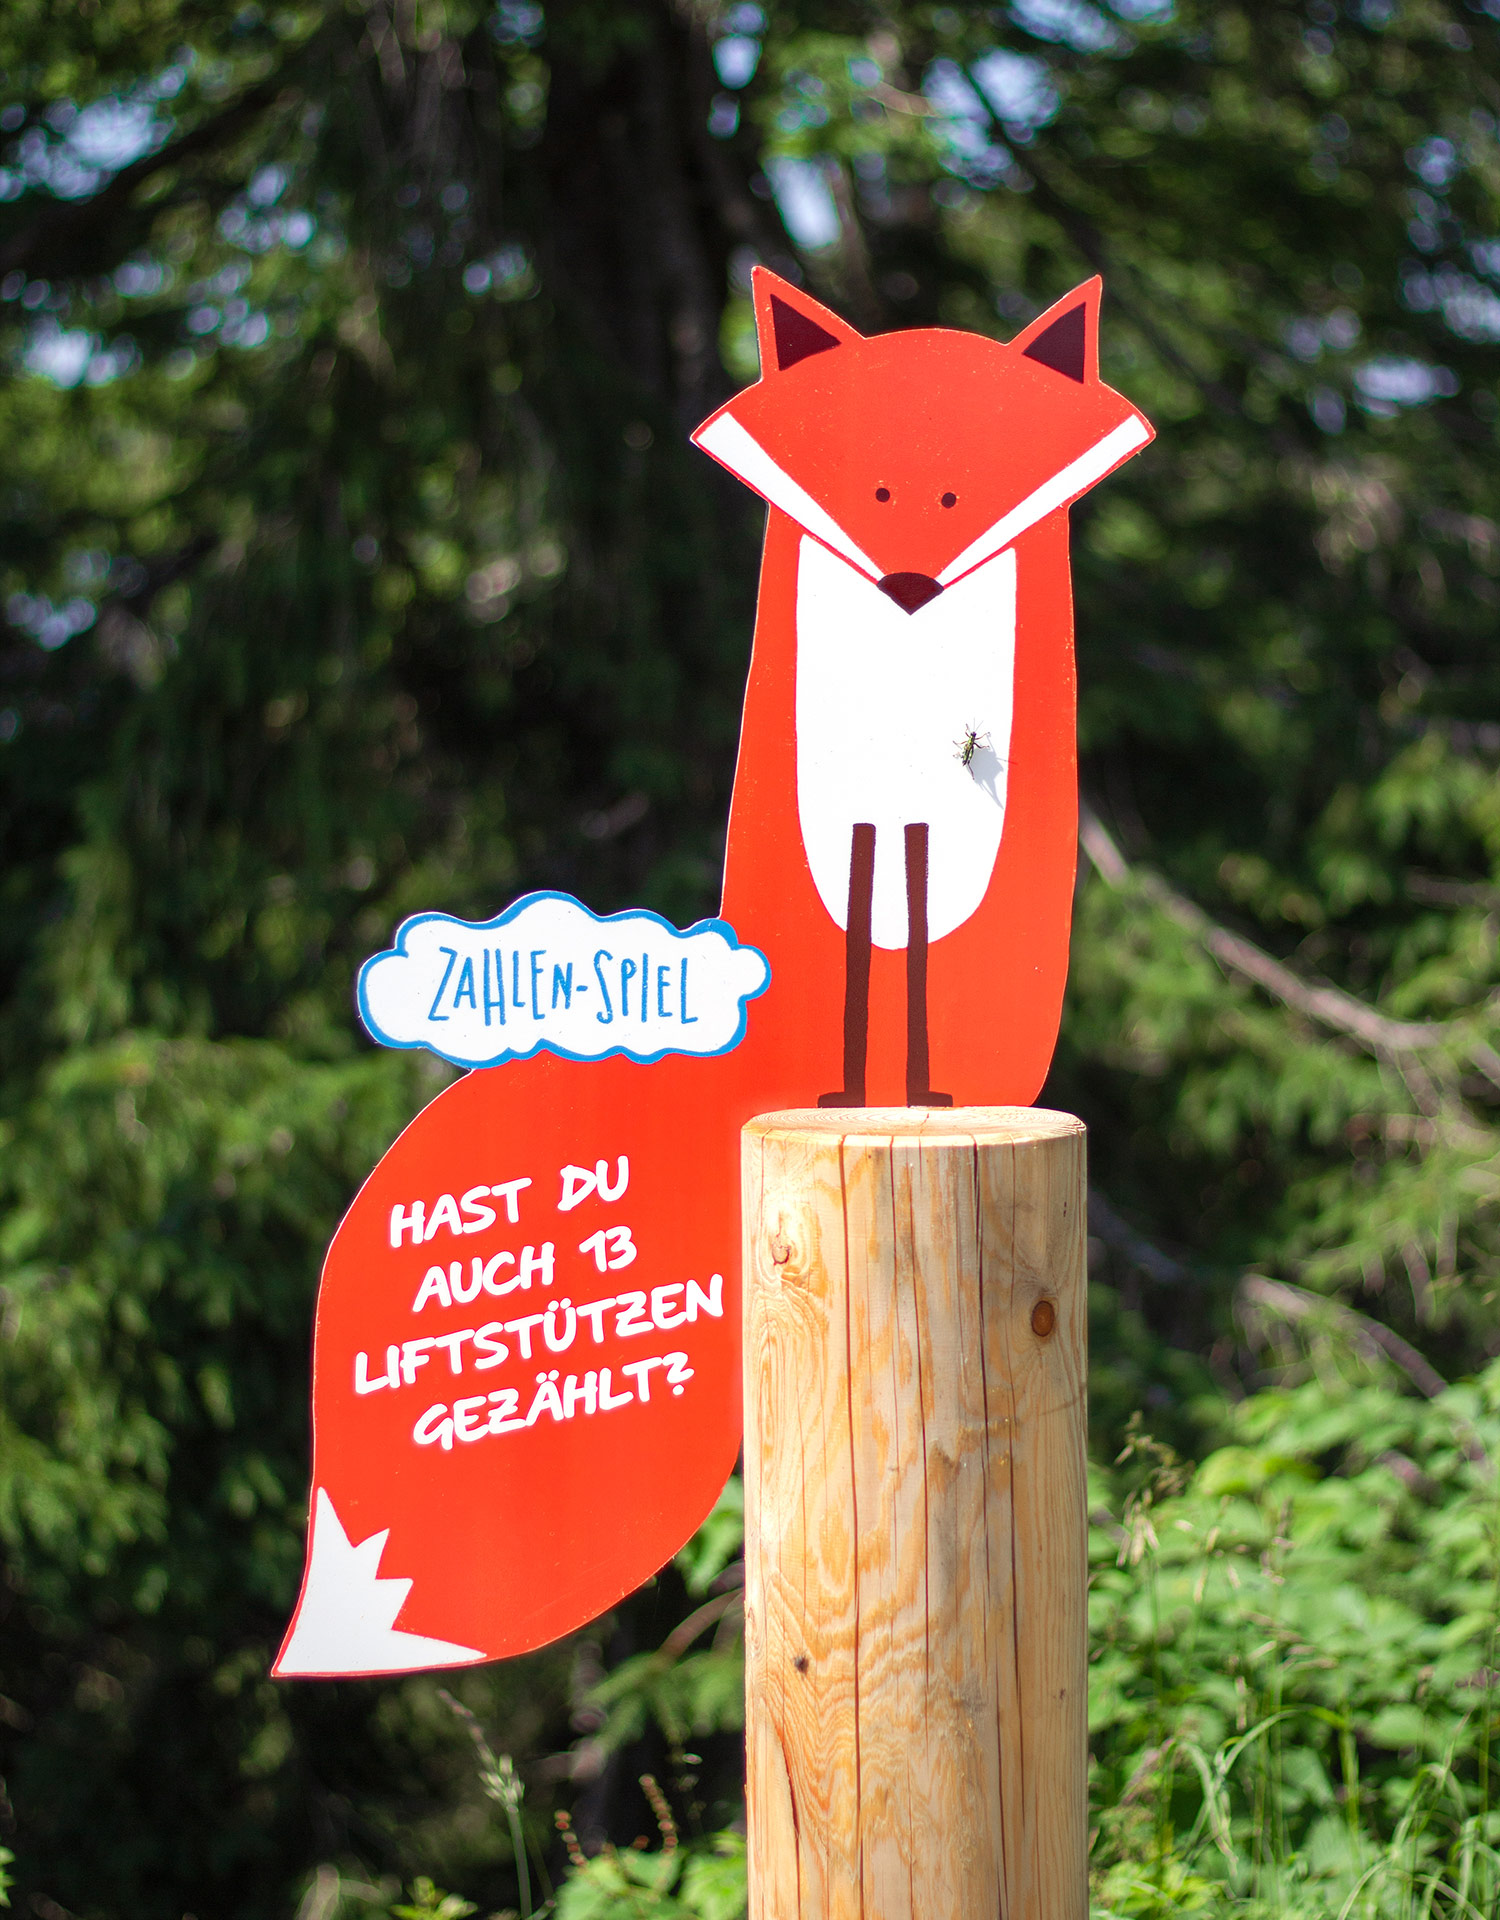 Illustration of a fox sitting on a wooden post